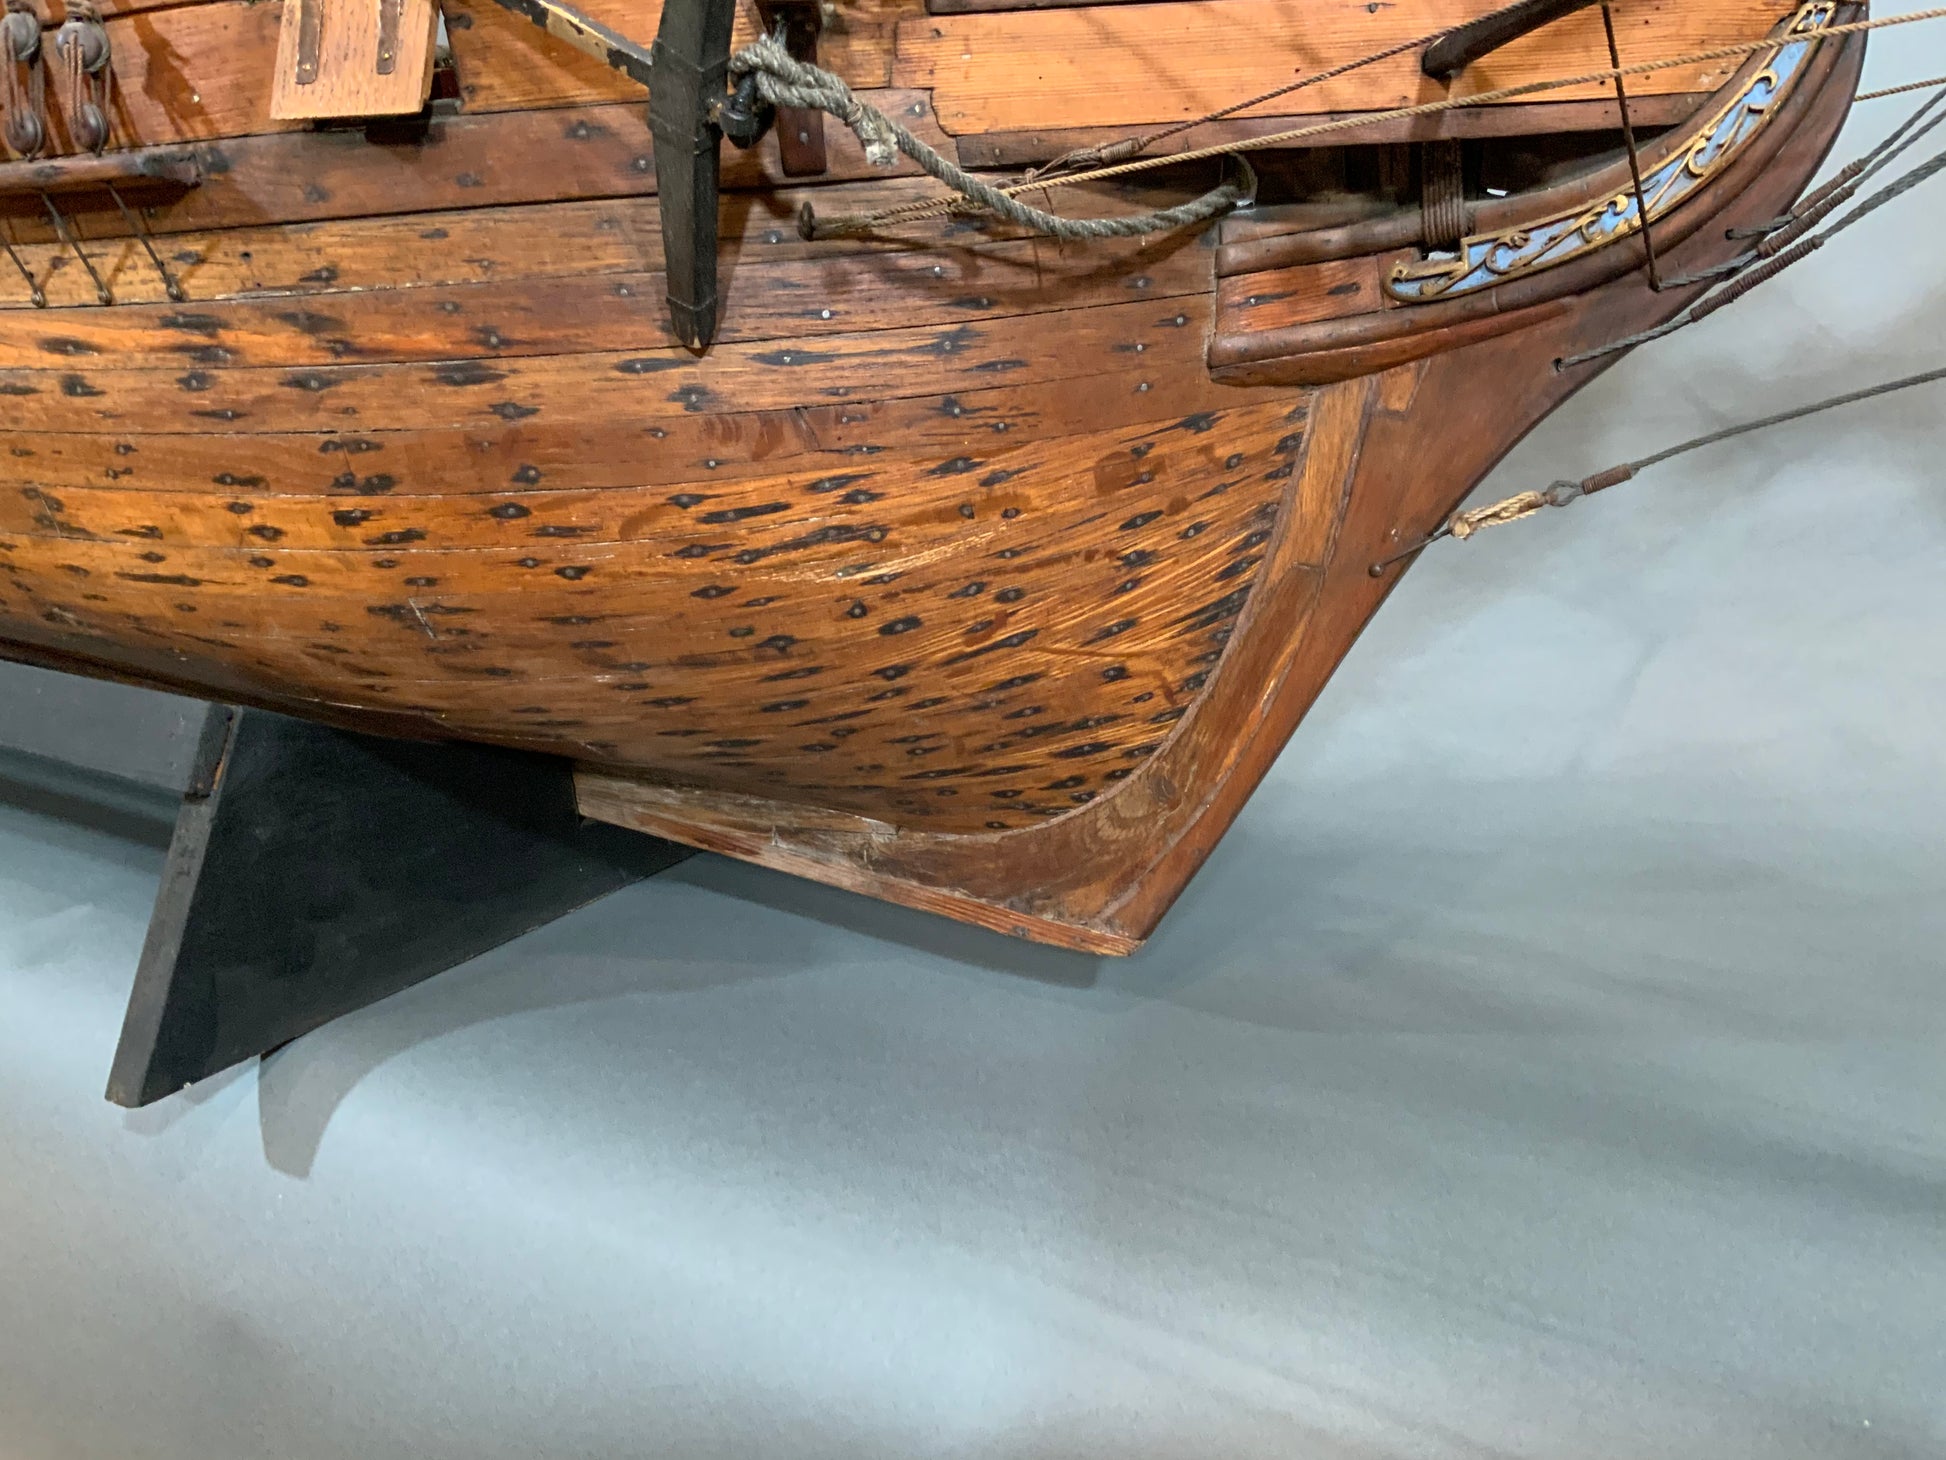 Historic Ship Model from the DeCoppet Collection - Lannan Gallery